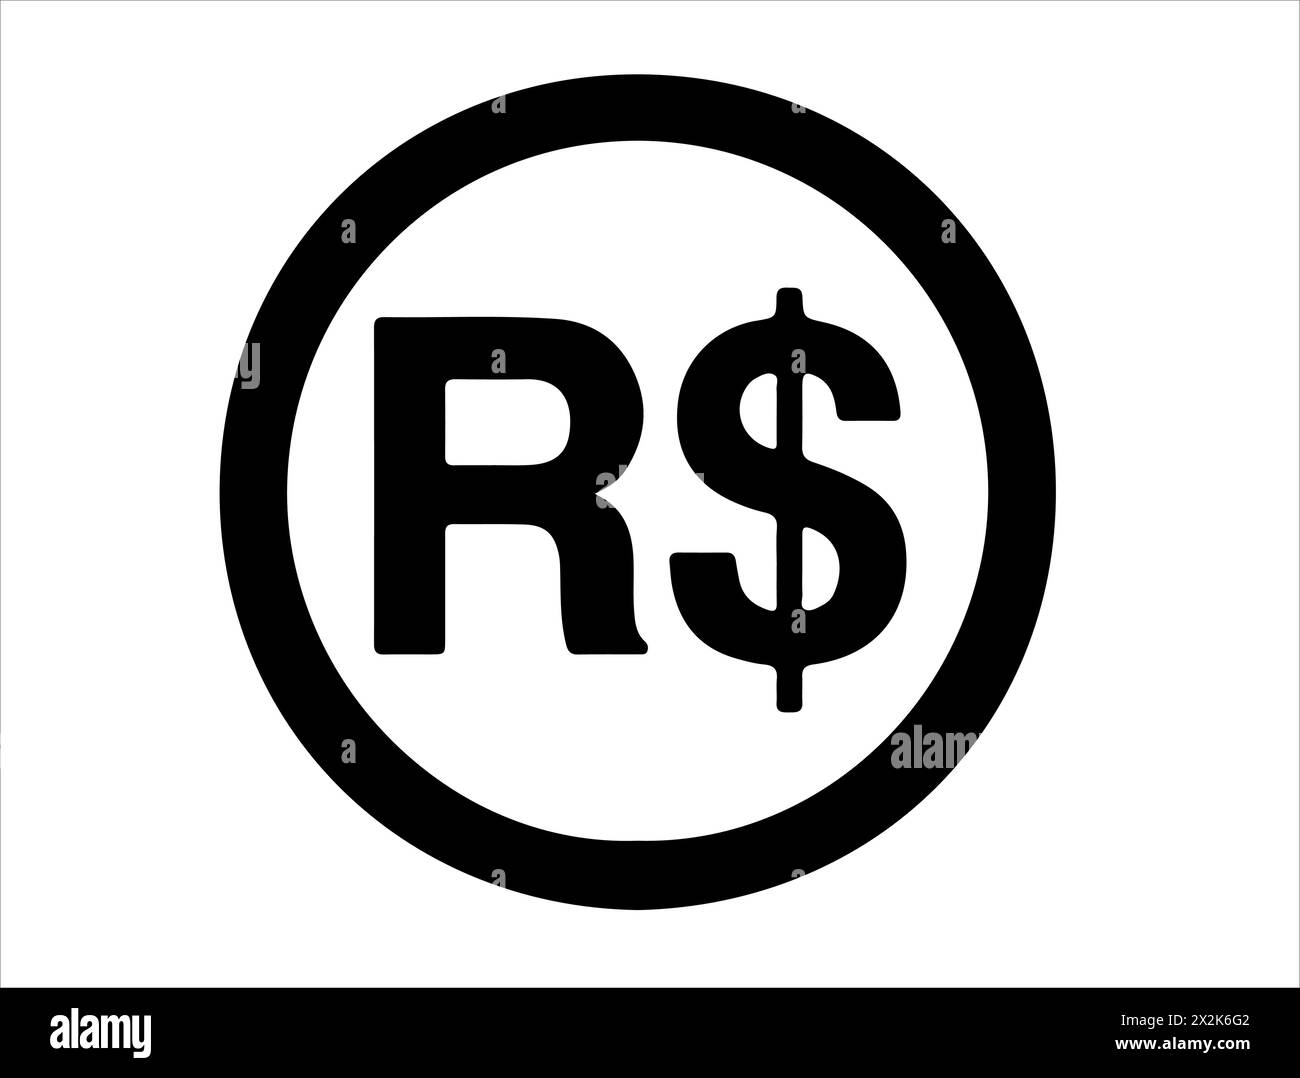 Brazil real currency sign silhouette Stock Vector